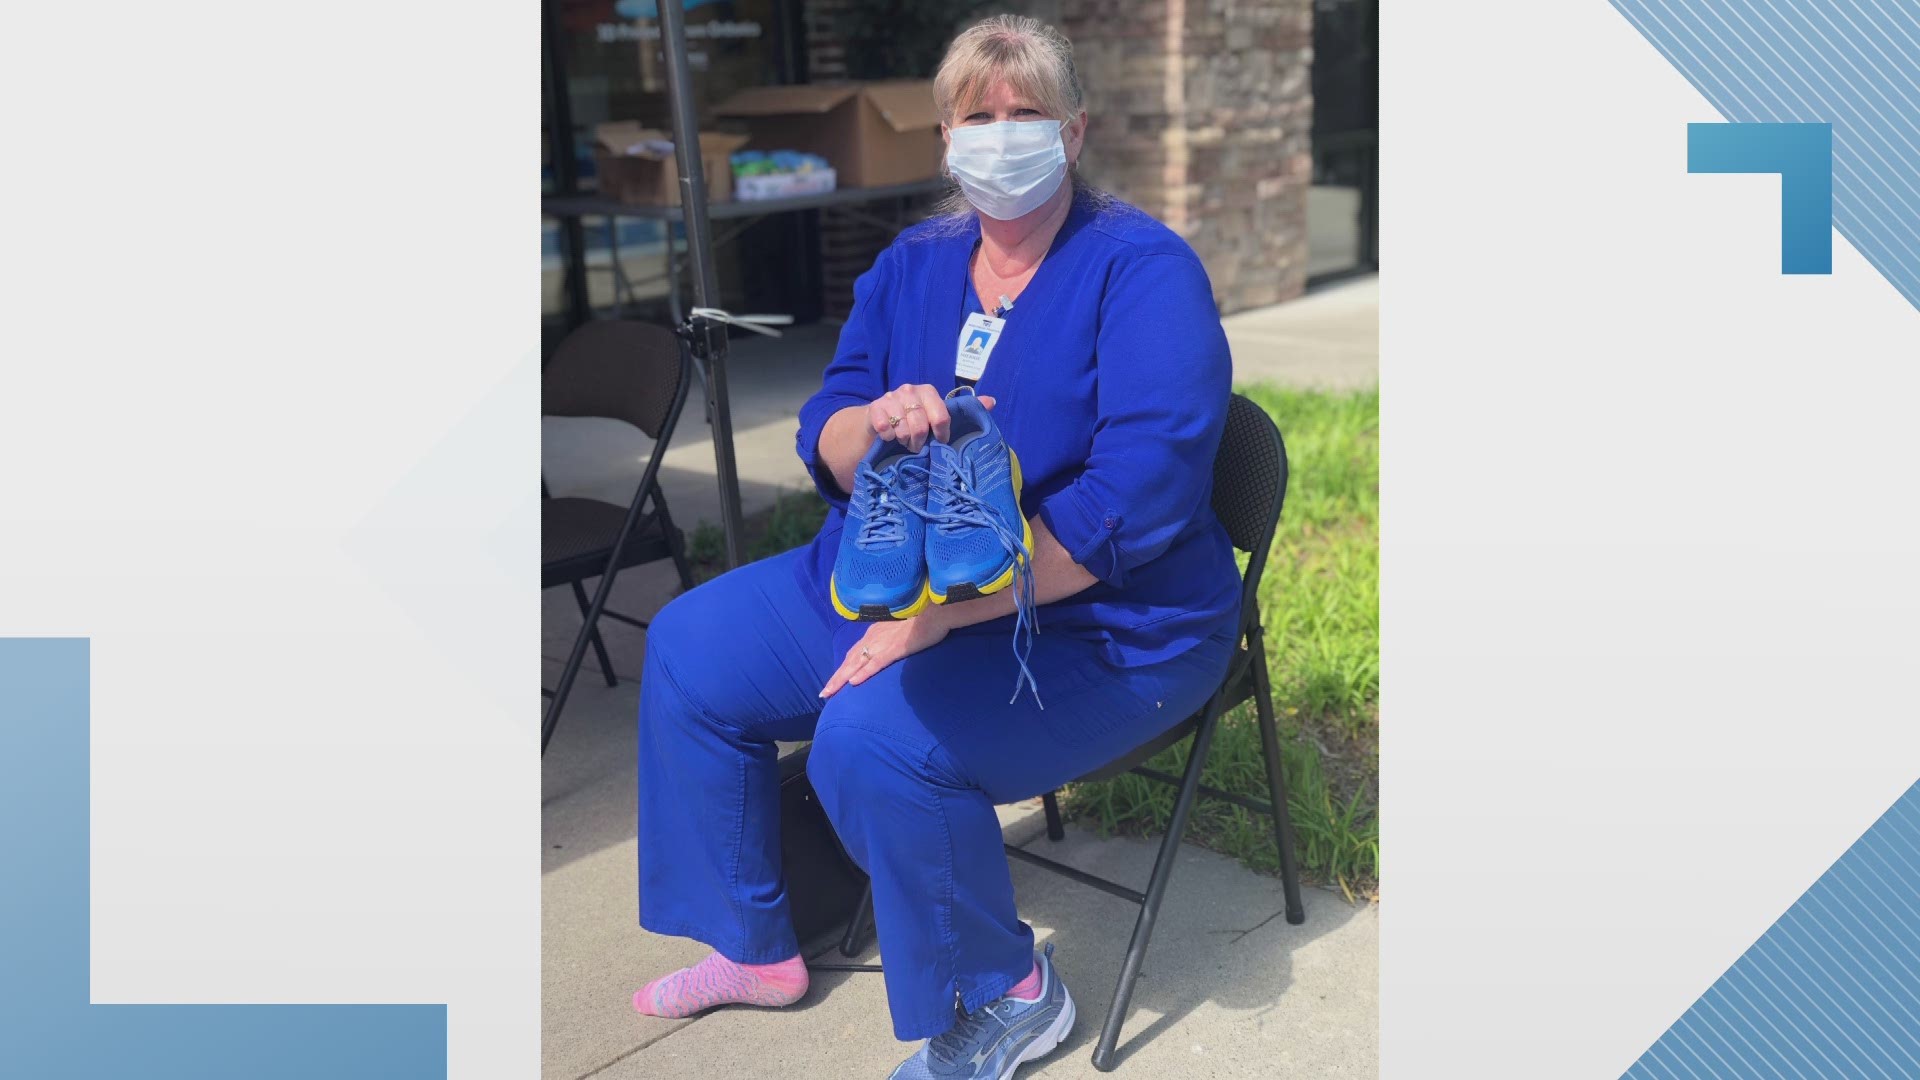 The North Georgia Running Company is giving away nearly $10,000 in shoes to people on the front lines of the coronavirus pandemic.